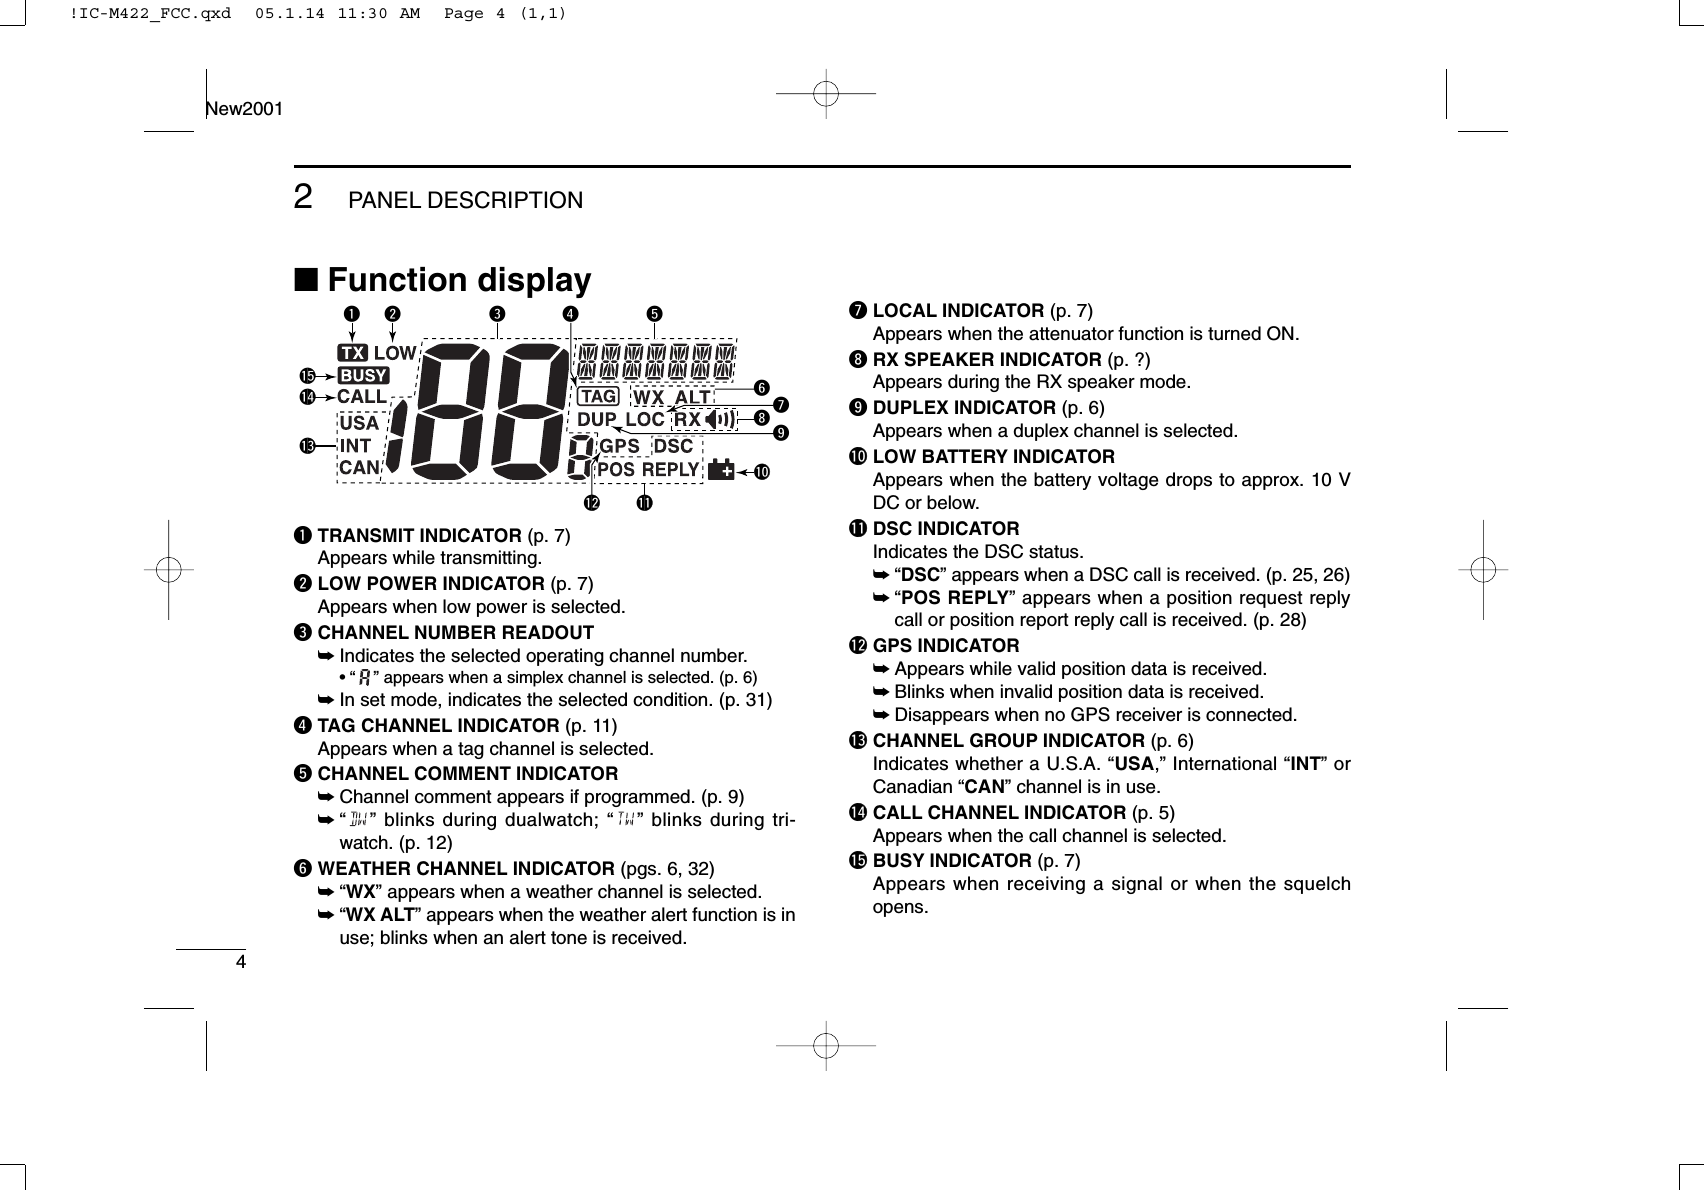 42PANEL DESCRIPTIONNew2001■Function displayqTRANSMIT INDICATOR (p. 7)Appears while transmitting.wLOW POWER INDICATOR (p. 7)Appears when low power is selected.eCHANNEL NUMBER READOUT➥Indicates the selected operating channel number.• “” appears when a simplex channel is selected. (p. 6)➥In set mode, indicates the selected condition. (p. 31)rTAG CHANNEL INDICATOR (p. 11)Appears when a tag channel is selected.tCHANNEL COMMENT INDICATOR➥Channel comment appears if programmed. (p. 9)➥“” blinks during dualwatch; “” blinks during tri-watch. (p. 12)yWEATHER CHANNEL INDICATOR (pgs. 6, 32)➥“WX” appears when a weather channel is selected.➥“WX ALT” appears when the weather alert function is inuse; blinks when an alert tone is received.uLOCAL INDICATOR (p. 7)Appears when the attenuator function is turned ON.iRX SPEAKER INDICATOR (p. ?)Appears during the RX speaker mode.oDUPLEX INDICATOR (p. 6)Appears when a duplex channel is selected.!0 LOW BATTERY INDICATORAppears when the battery voltage drops to approx. 10 VDC or below.!1 DSC INDICATORIndicates the DSC status.➥“DSC” appears when a DSC call is received. (p. 25, 26)➥“POS REPLY” appears when a position request replycall or position report reply call is received. (p. 28)!2 GPS INDICATOR➥Appears while valid position data is received.➥Blinks when invalid position data is received.➥Disappears when no GPS receiver is connected.!3 CHANNEL GROUP INDICATOR (p. 6)Indicates whether a U.S.A. “USA,” International “INT” orCanadian “CAN” channel is in use.!4 CALL CHANNEL INDICATOR (p. 5)Appears when the call channel is selected.!5 BUSY INDICATOR (p. 7)Appears when receiving a signal or when the squelchopens.qw e r t!0yi!1!2!5!4!3uo!IC-M422_FCC.qxd  05.1.14 11:30 AM  Page 4 (1,1)